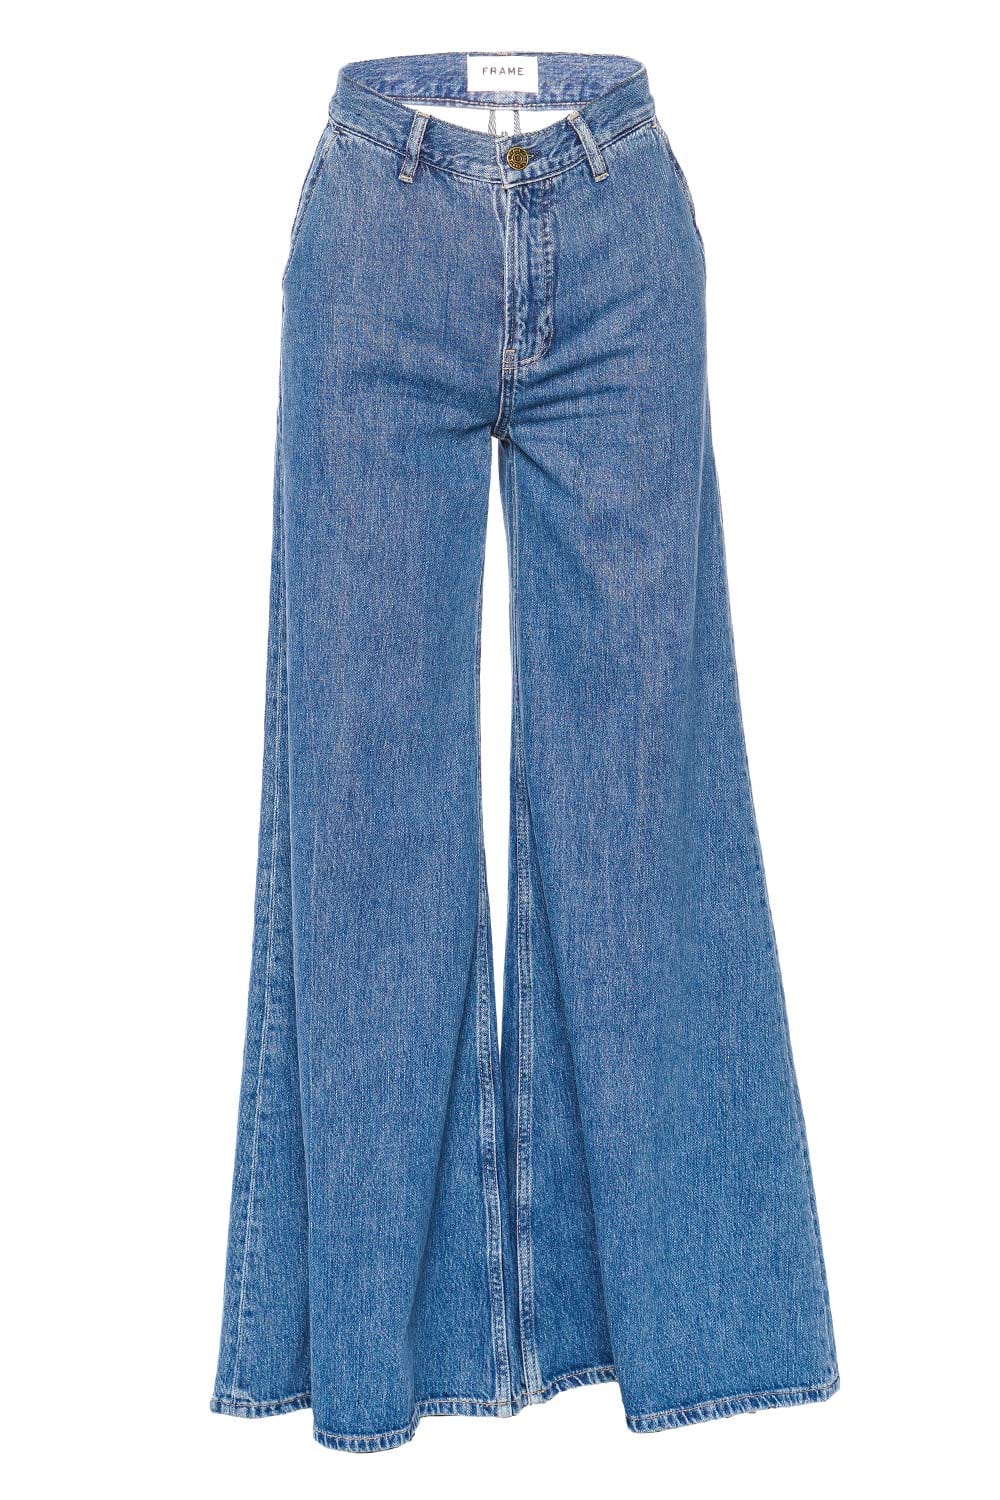 FRAME The Extra Wide Leg Jean